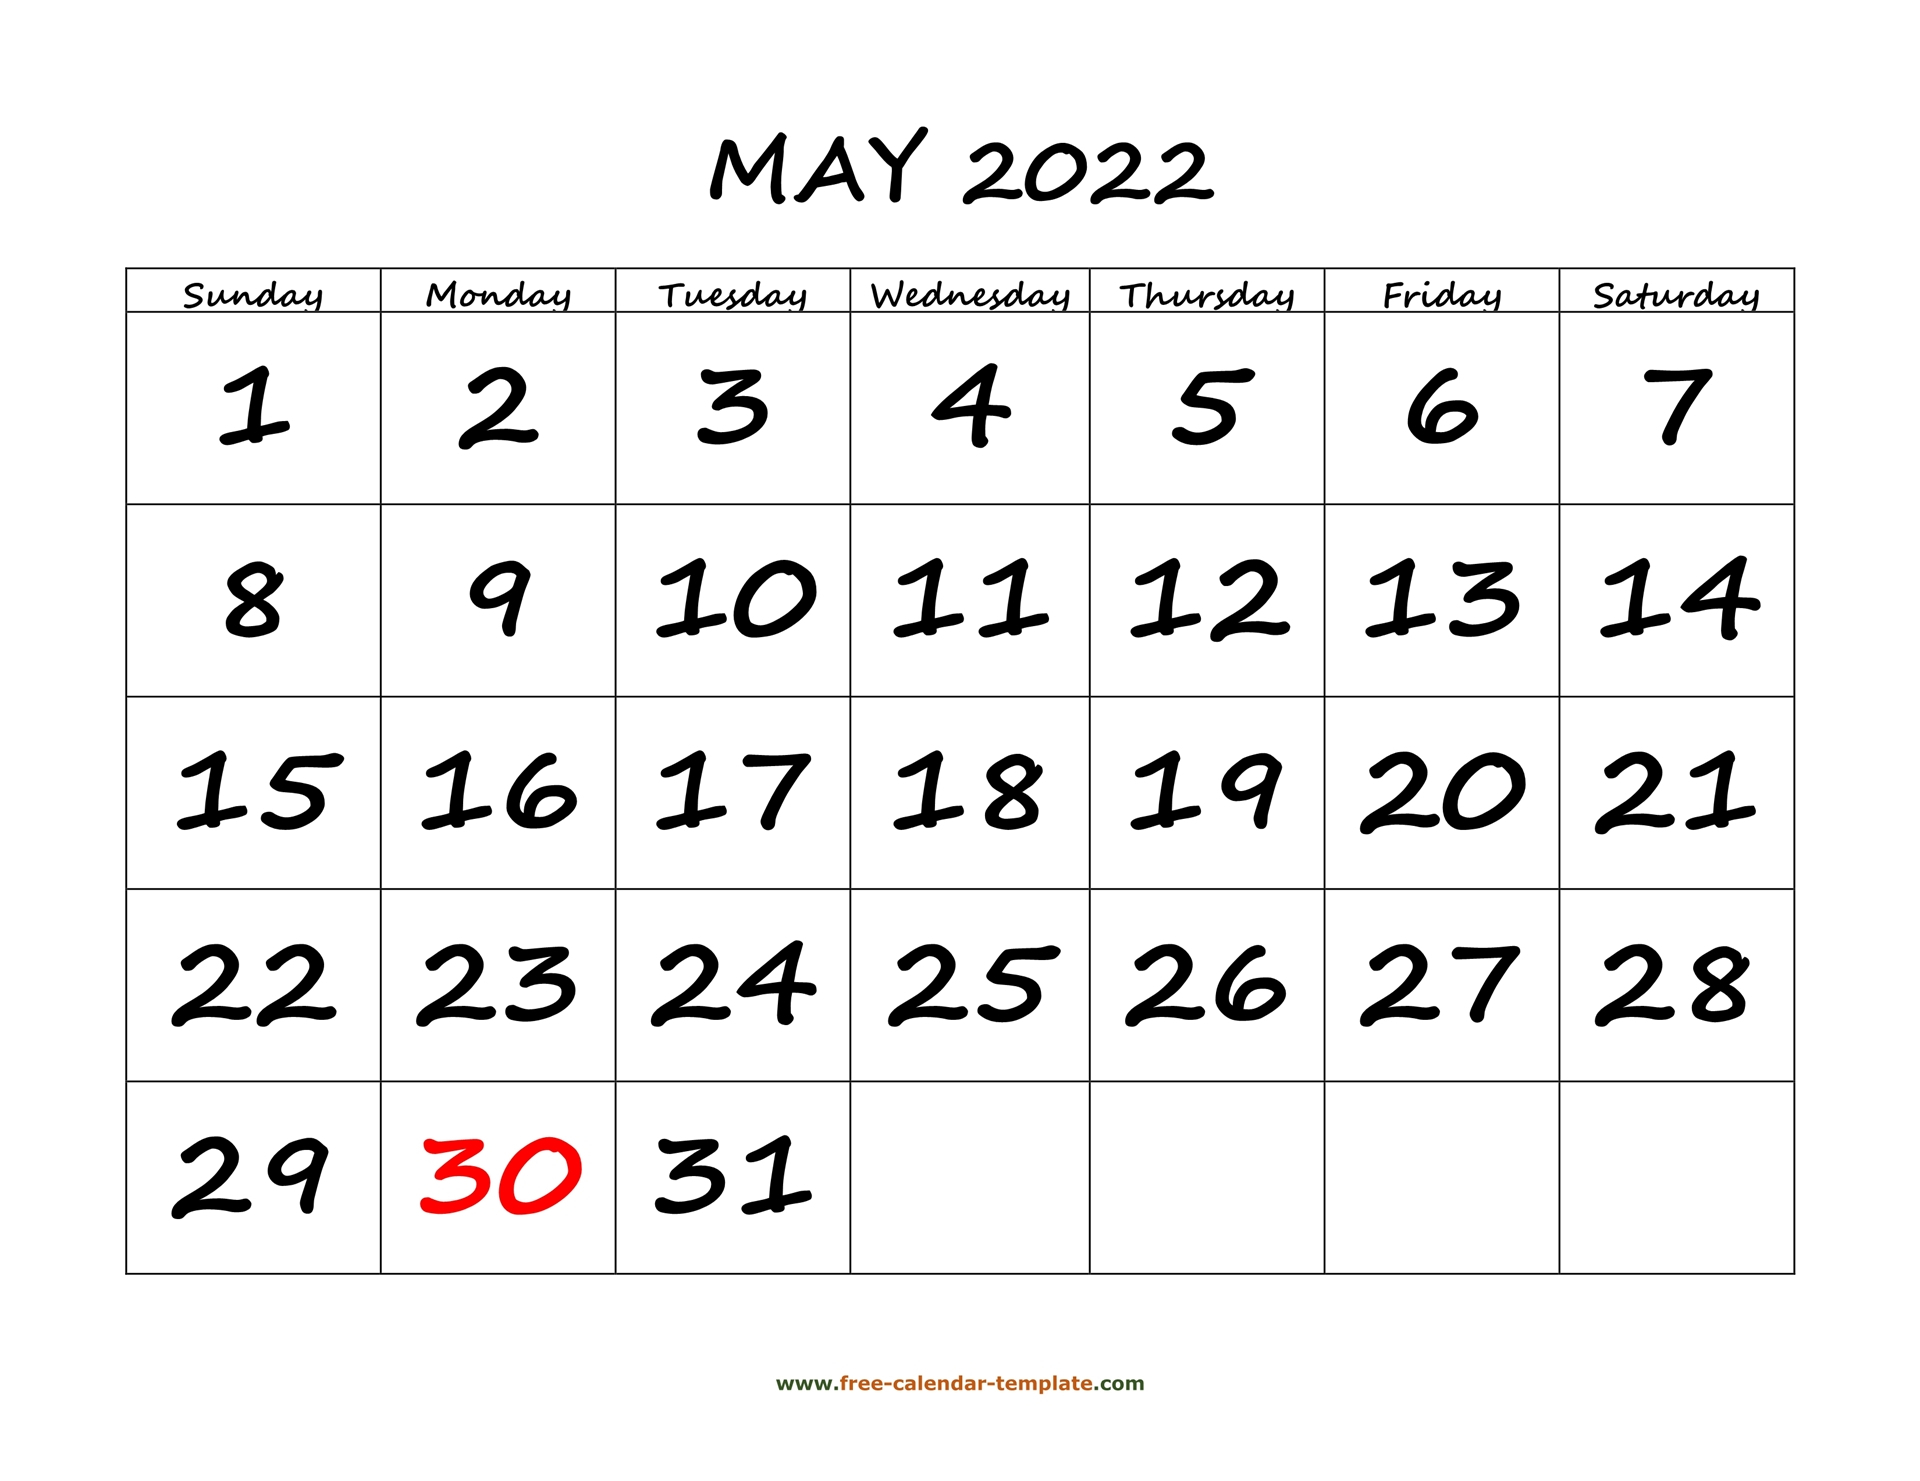 Take Monthly Calendar For May 2022